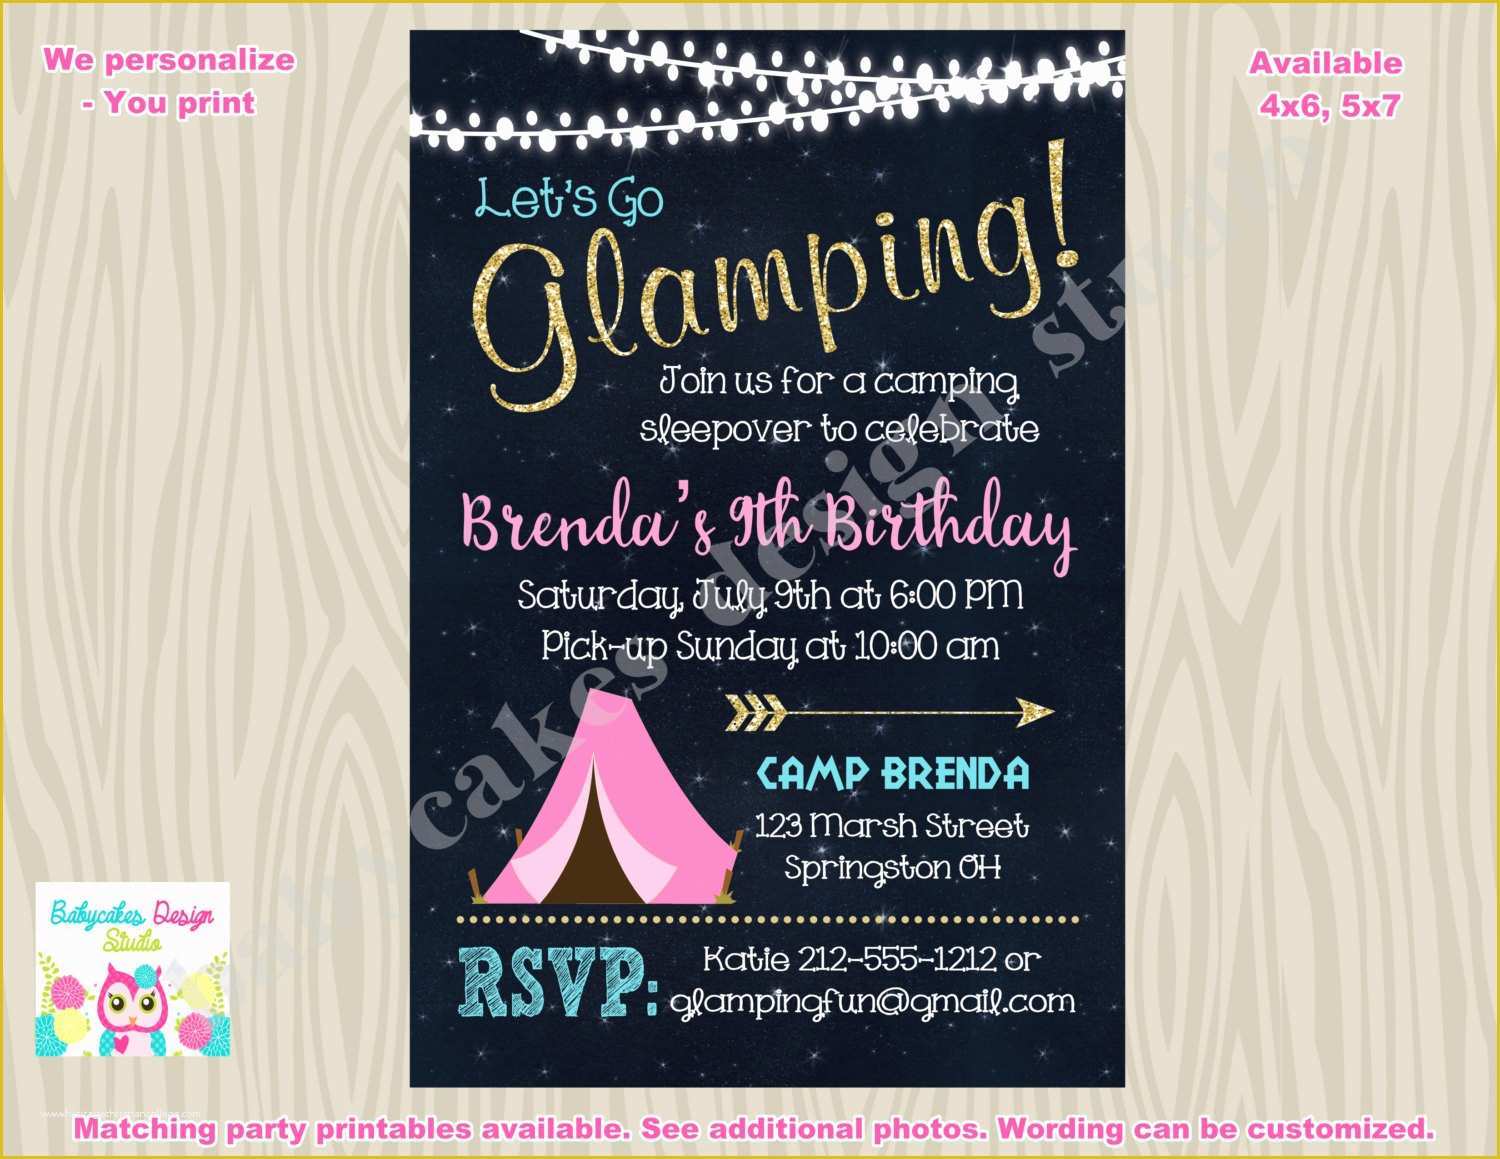 Campfire Invitation Template Free Of Glamping Invitation Glamping Birthday Invitation Camping